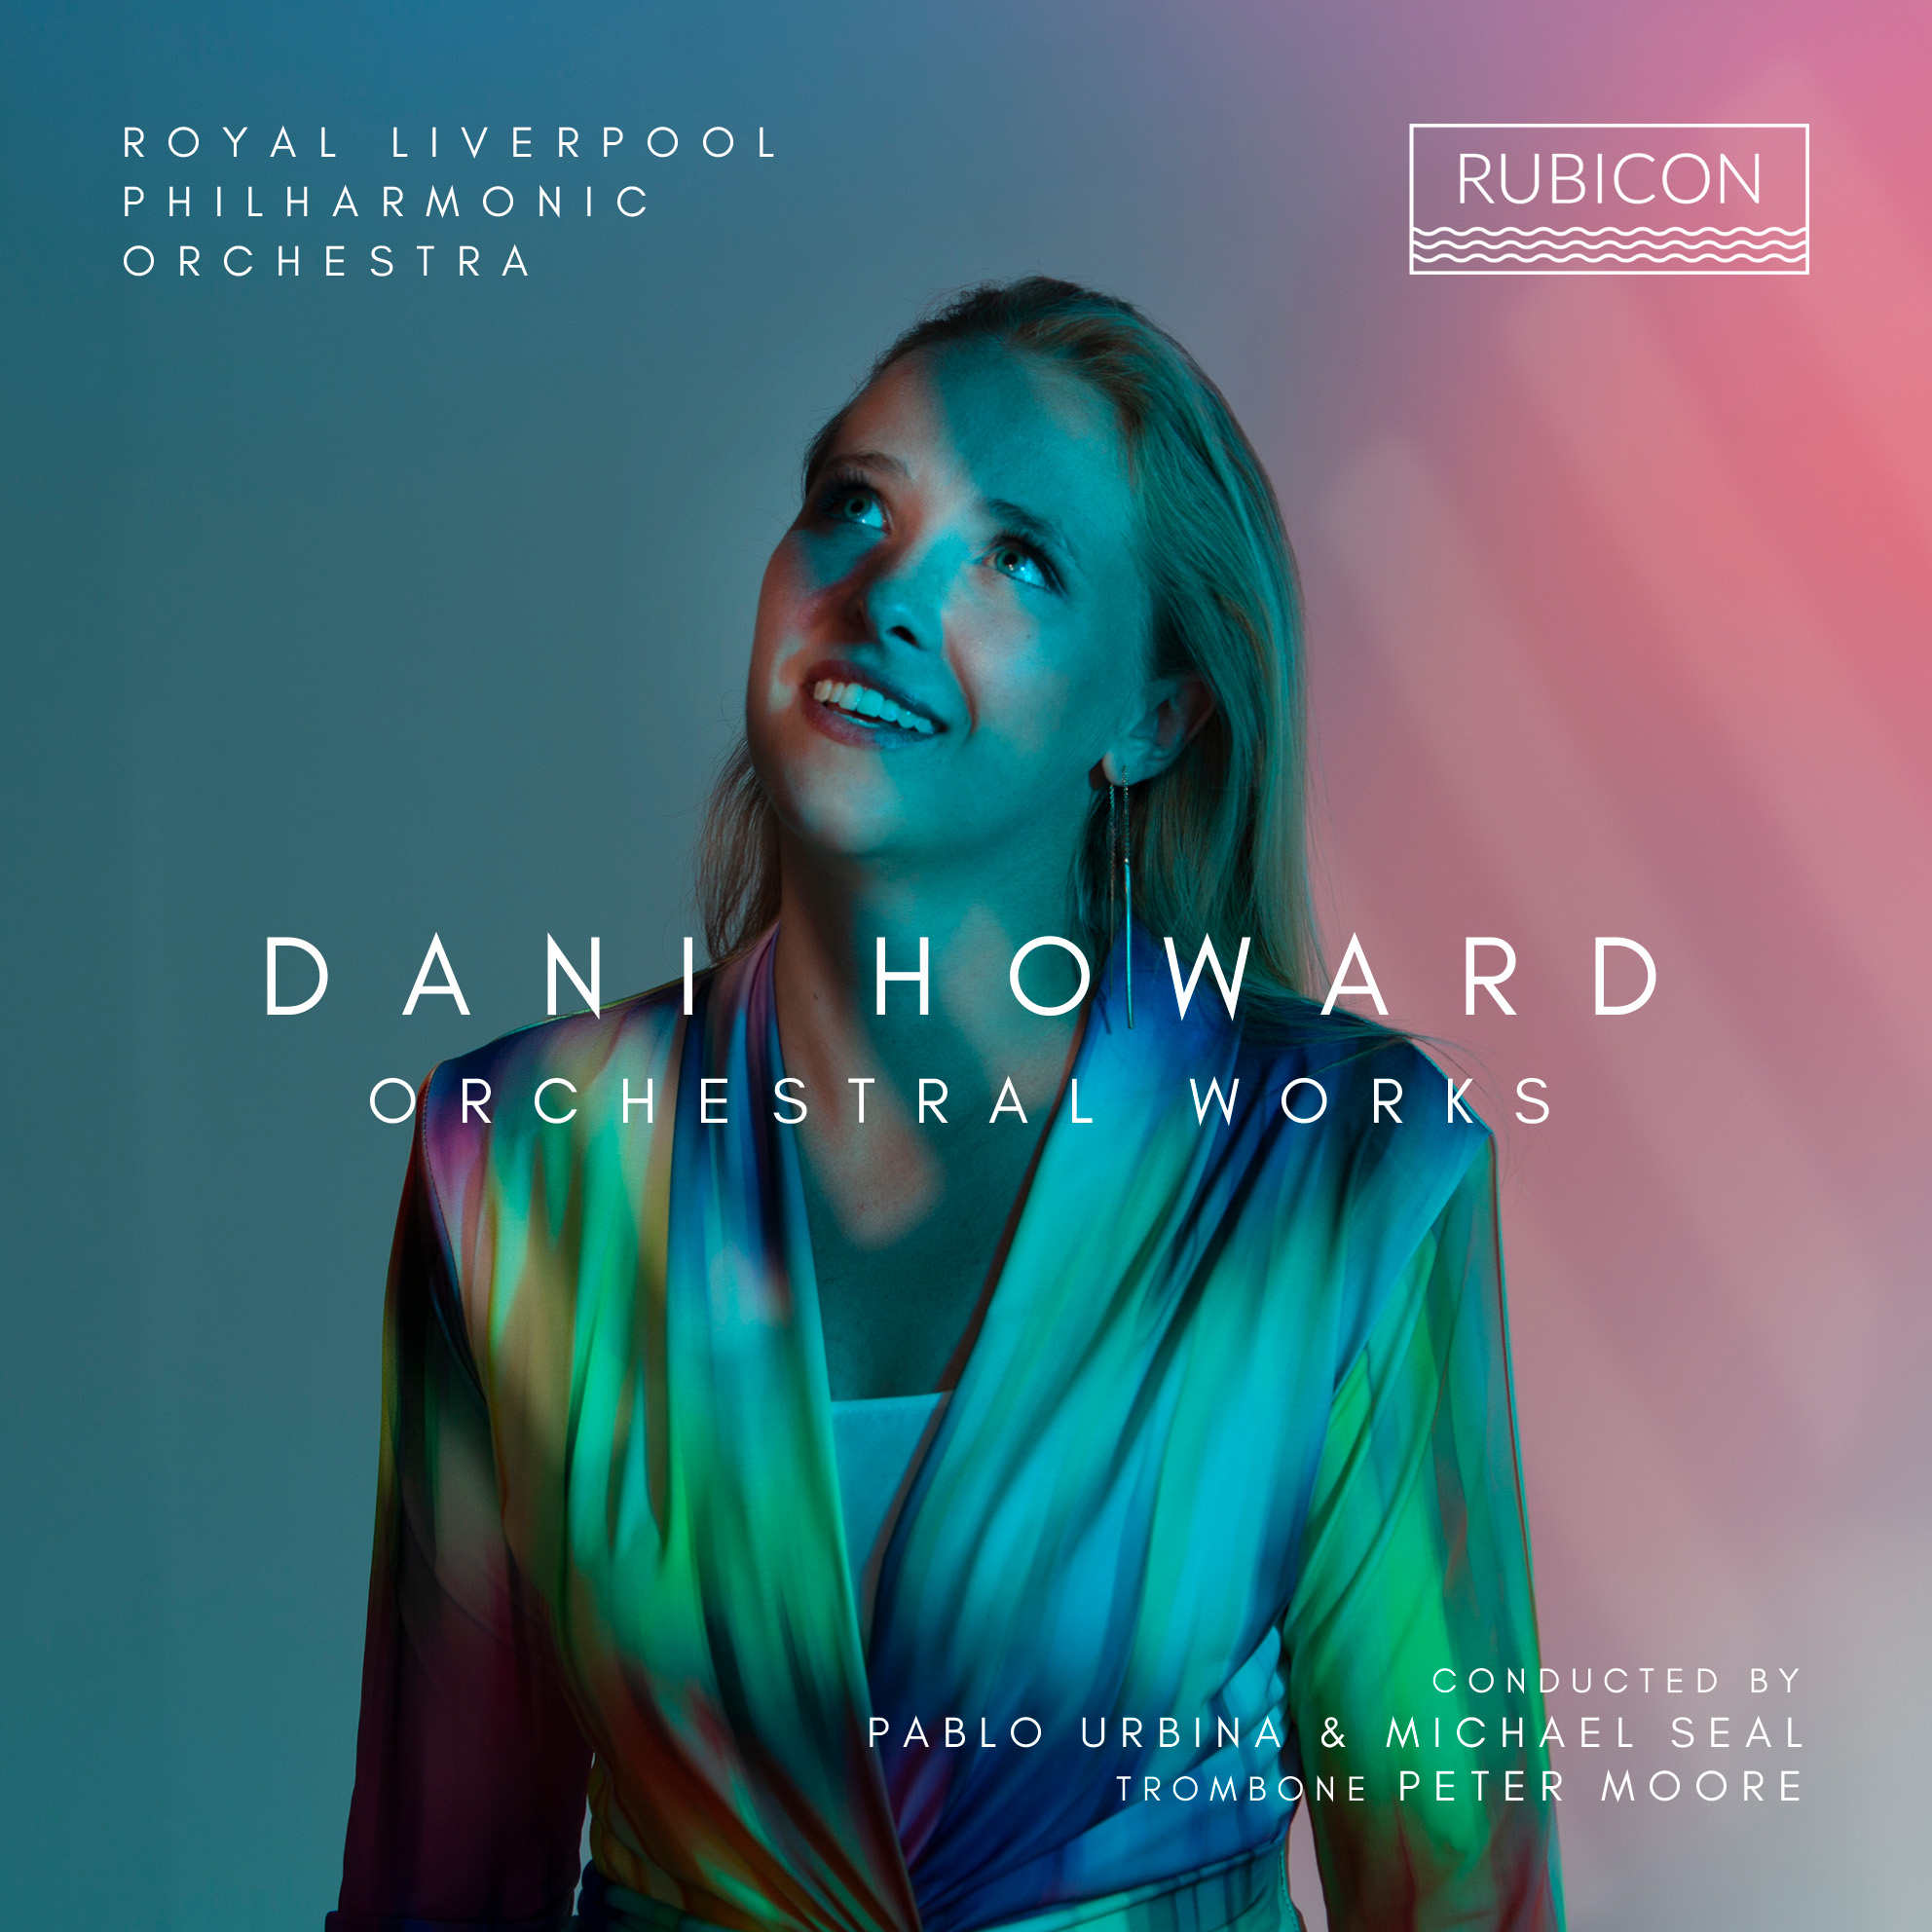 New Release – Dani Howard’s Orchestral Works